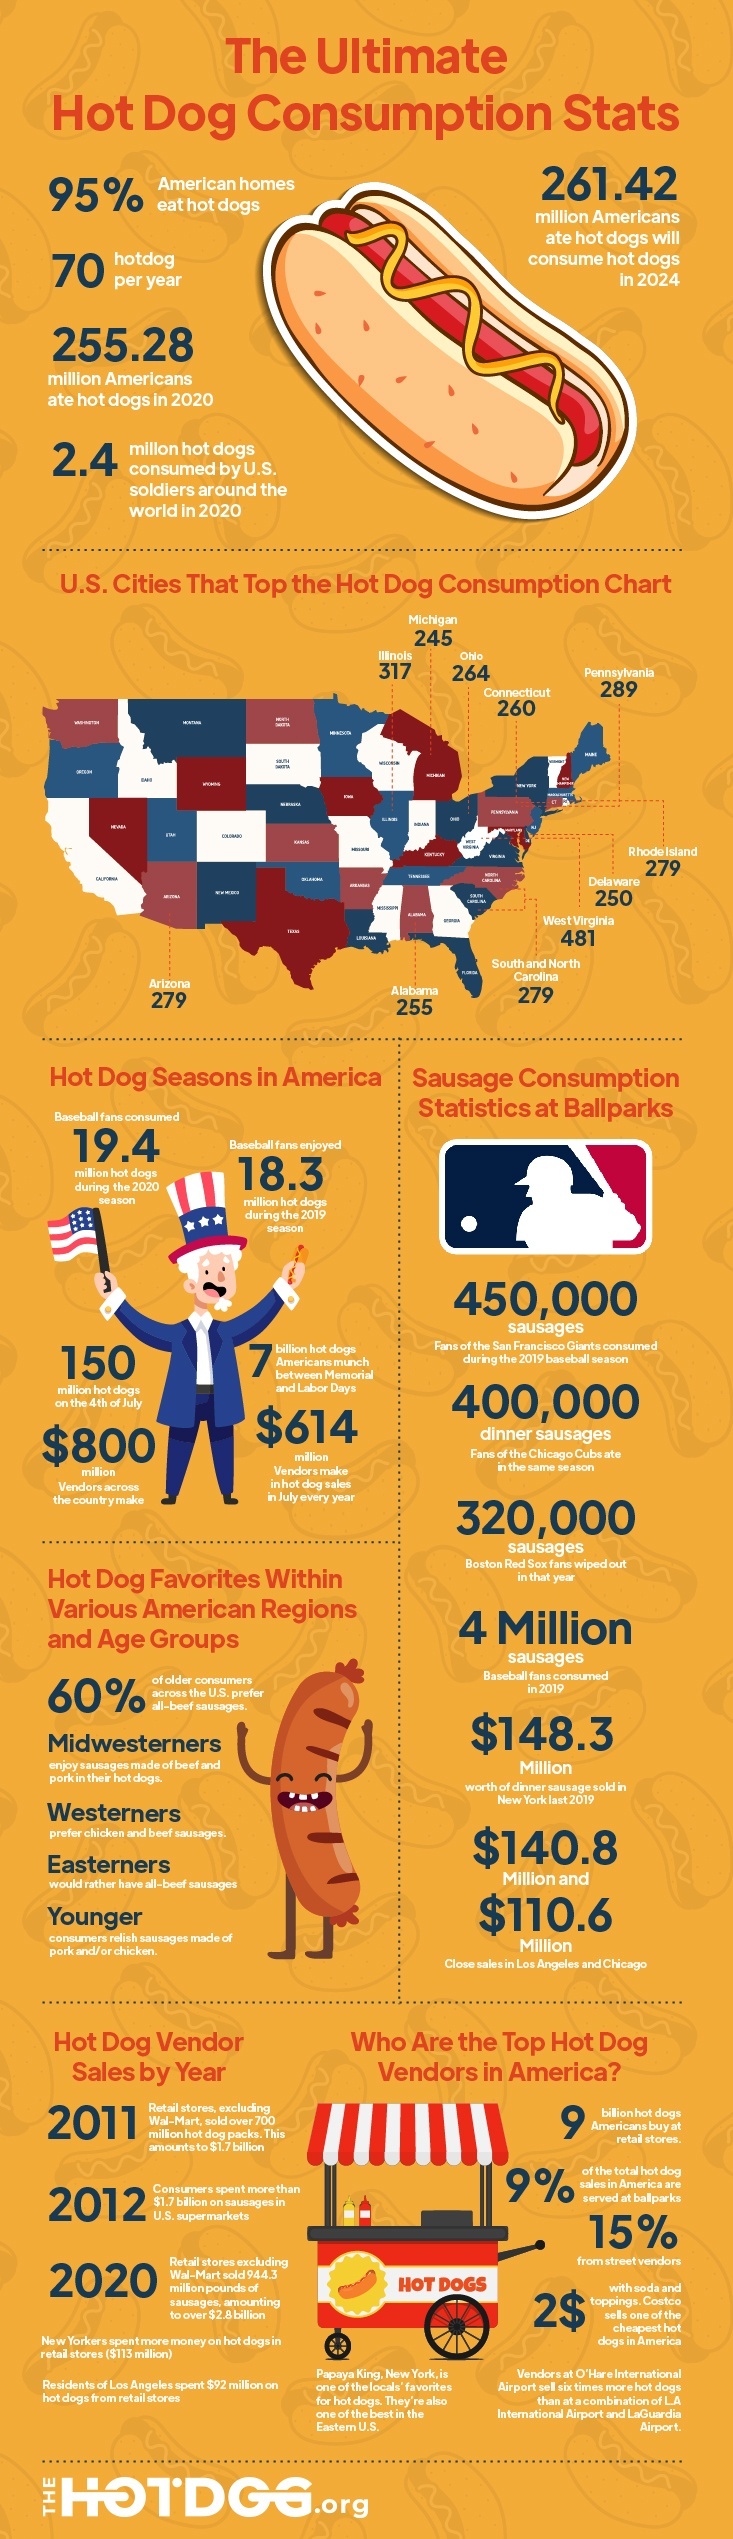 Hot Dog Stats Infographic